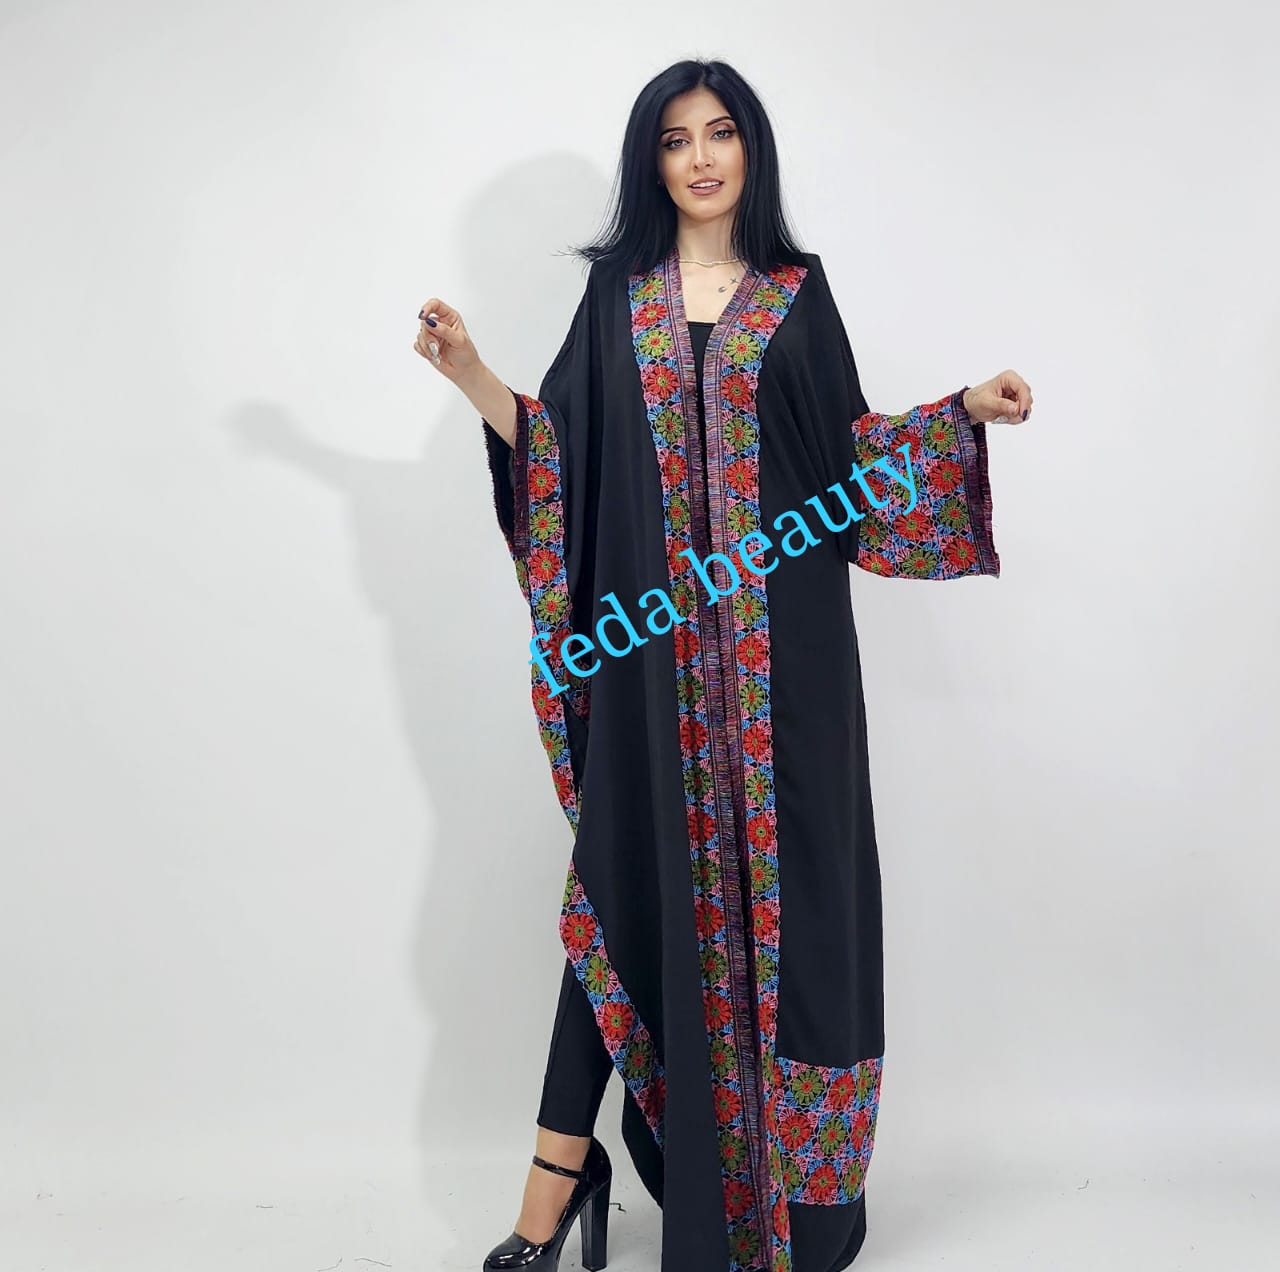 Abaya, styled oriental cardigan, with a new and elegant collection from Feda Beauty's private collection for the year 2023